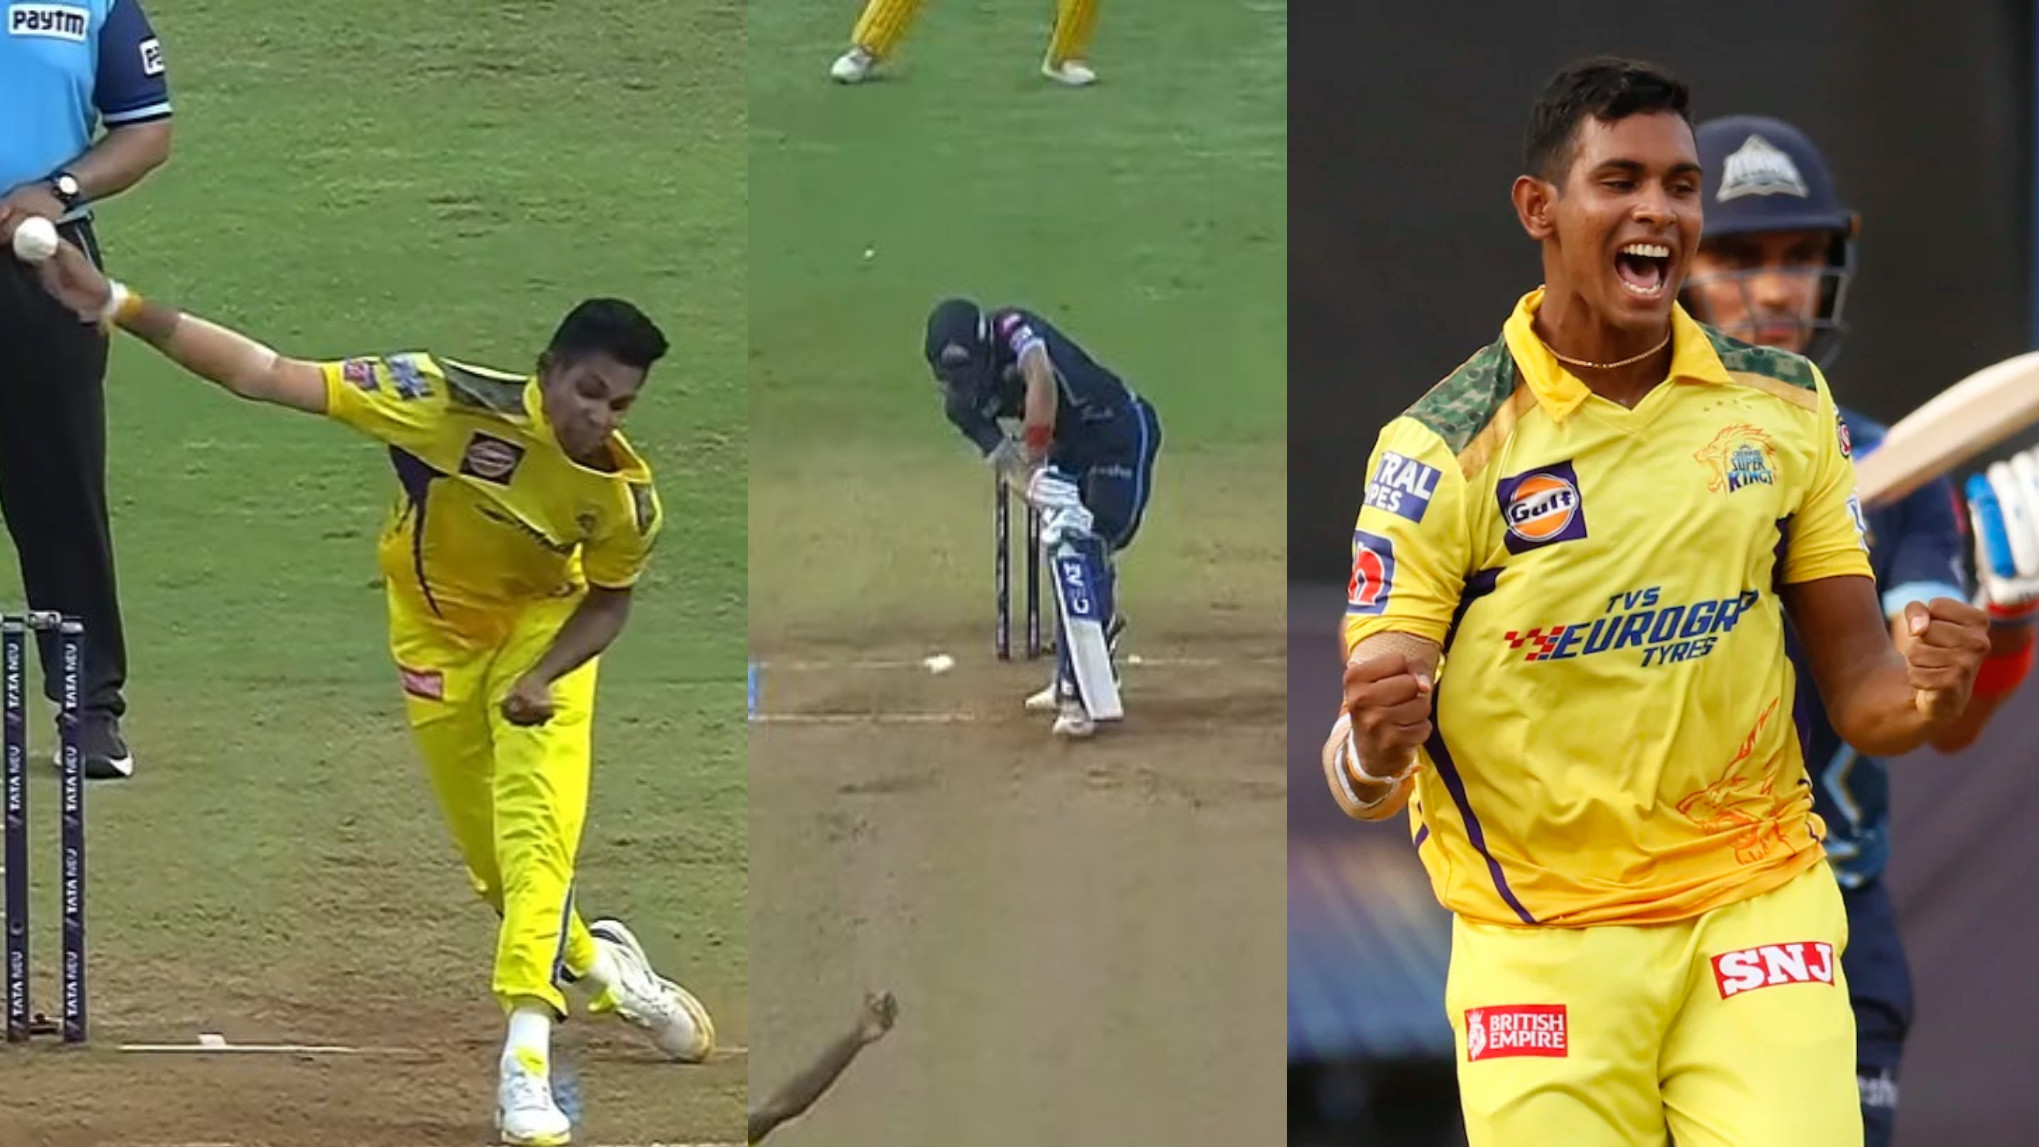 IPL 2022: WATCH- CSK’s Matheesha Pathirana takes first-ball wicket on IPL debut; gets Shubman Gill out LBW